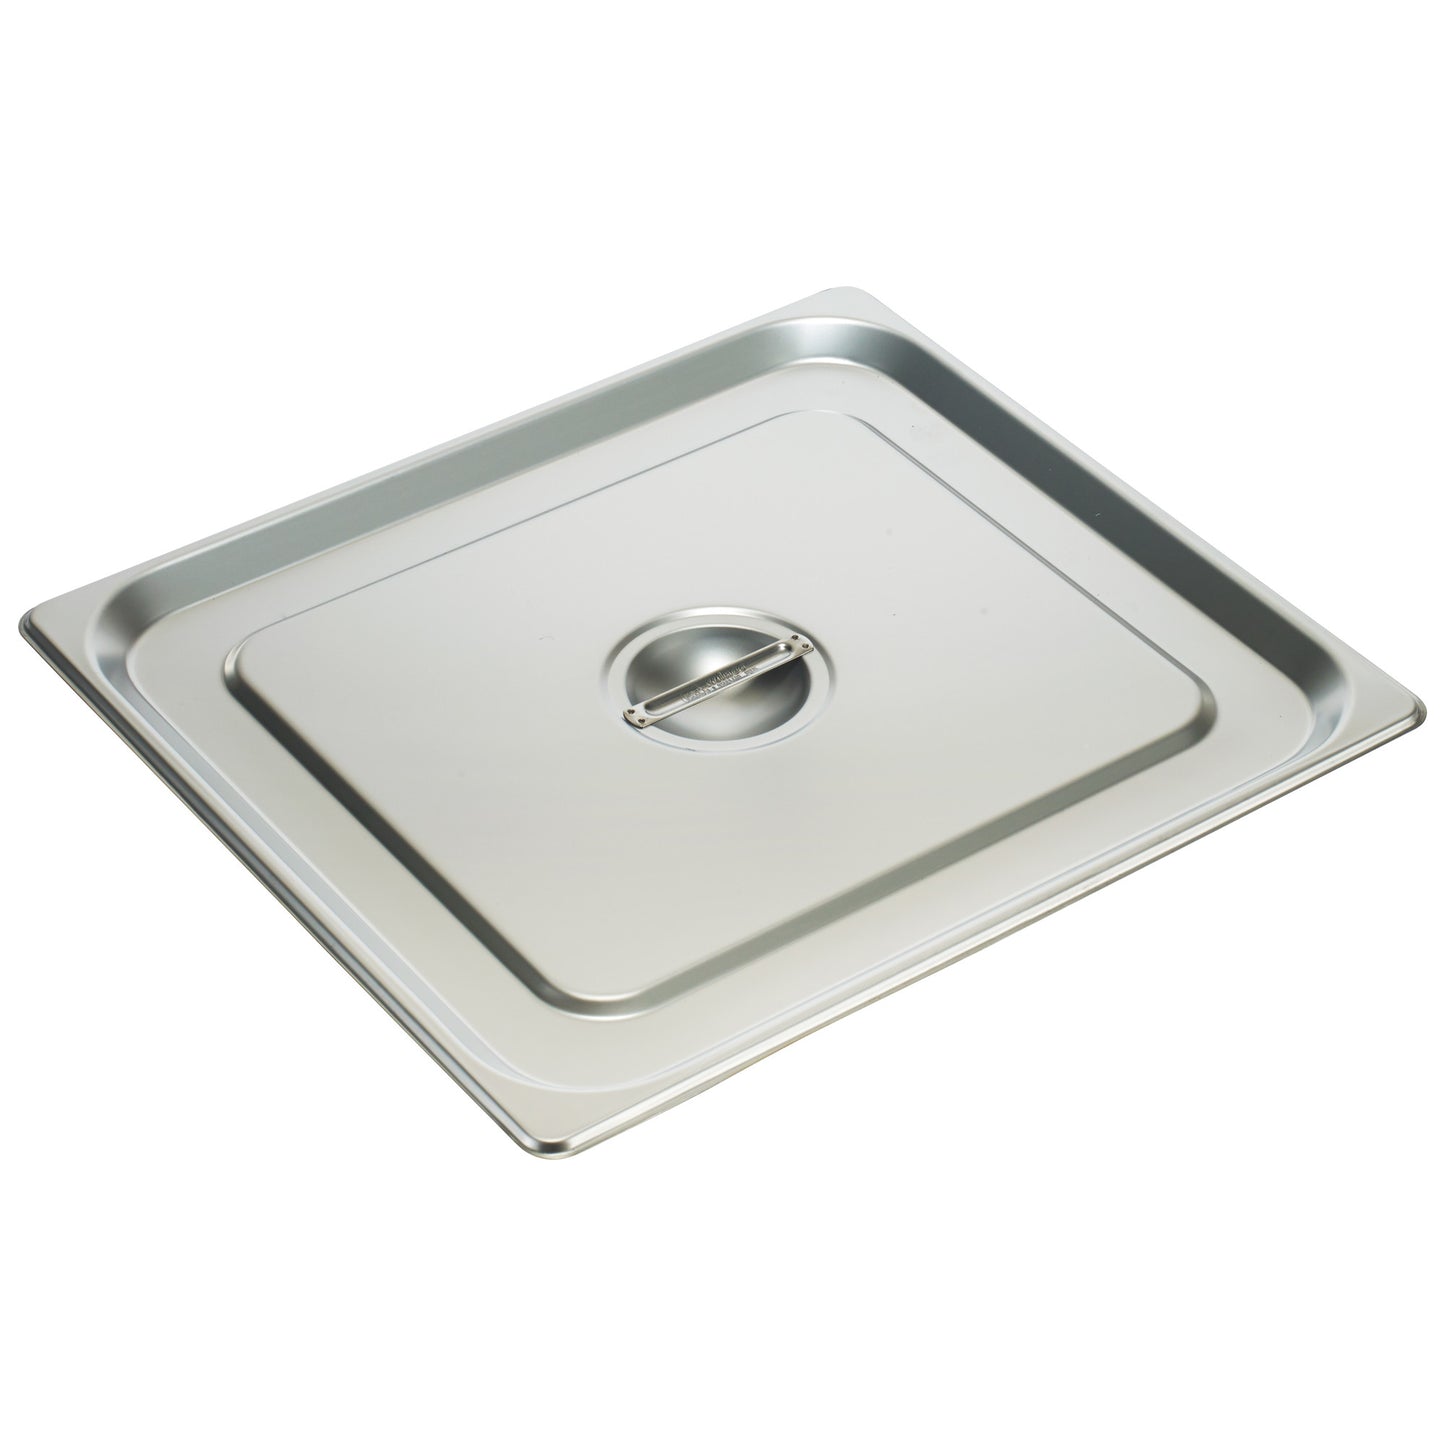 SPSCTT - 18/8 Stainless Steel Steam Pan Cover, Solid - Two-Thirds (2/3)